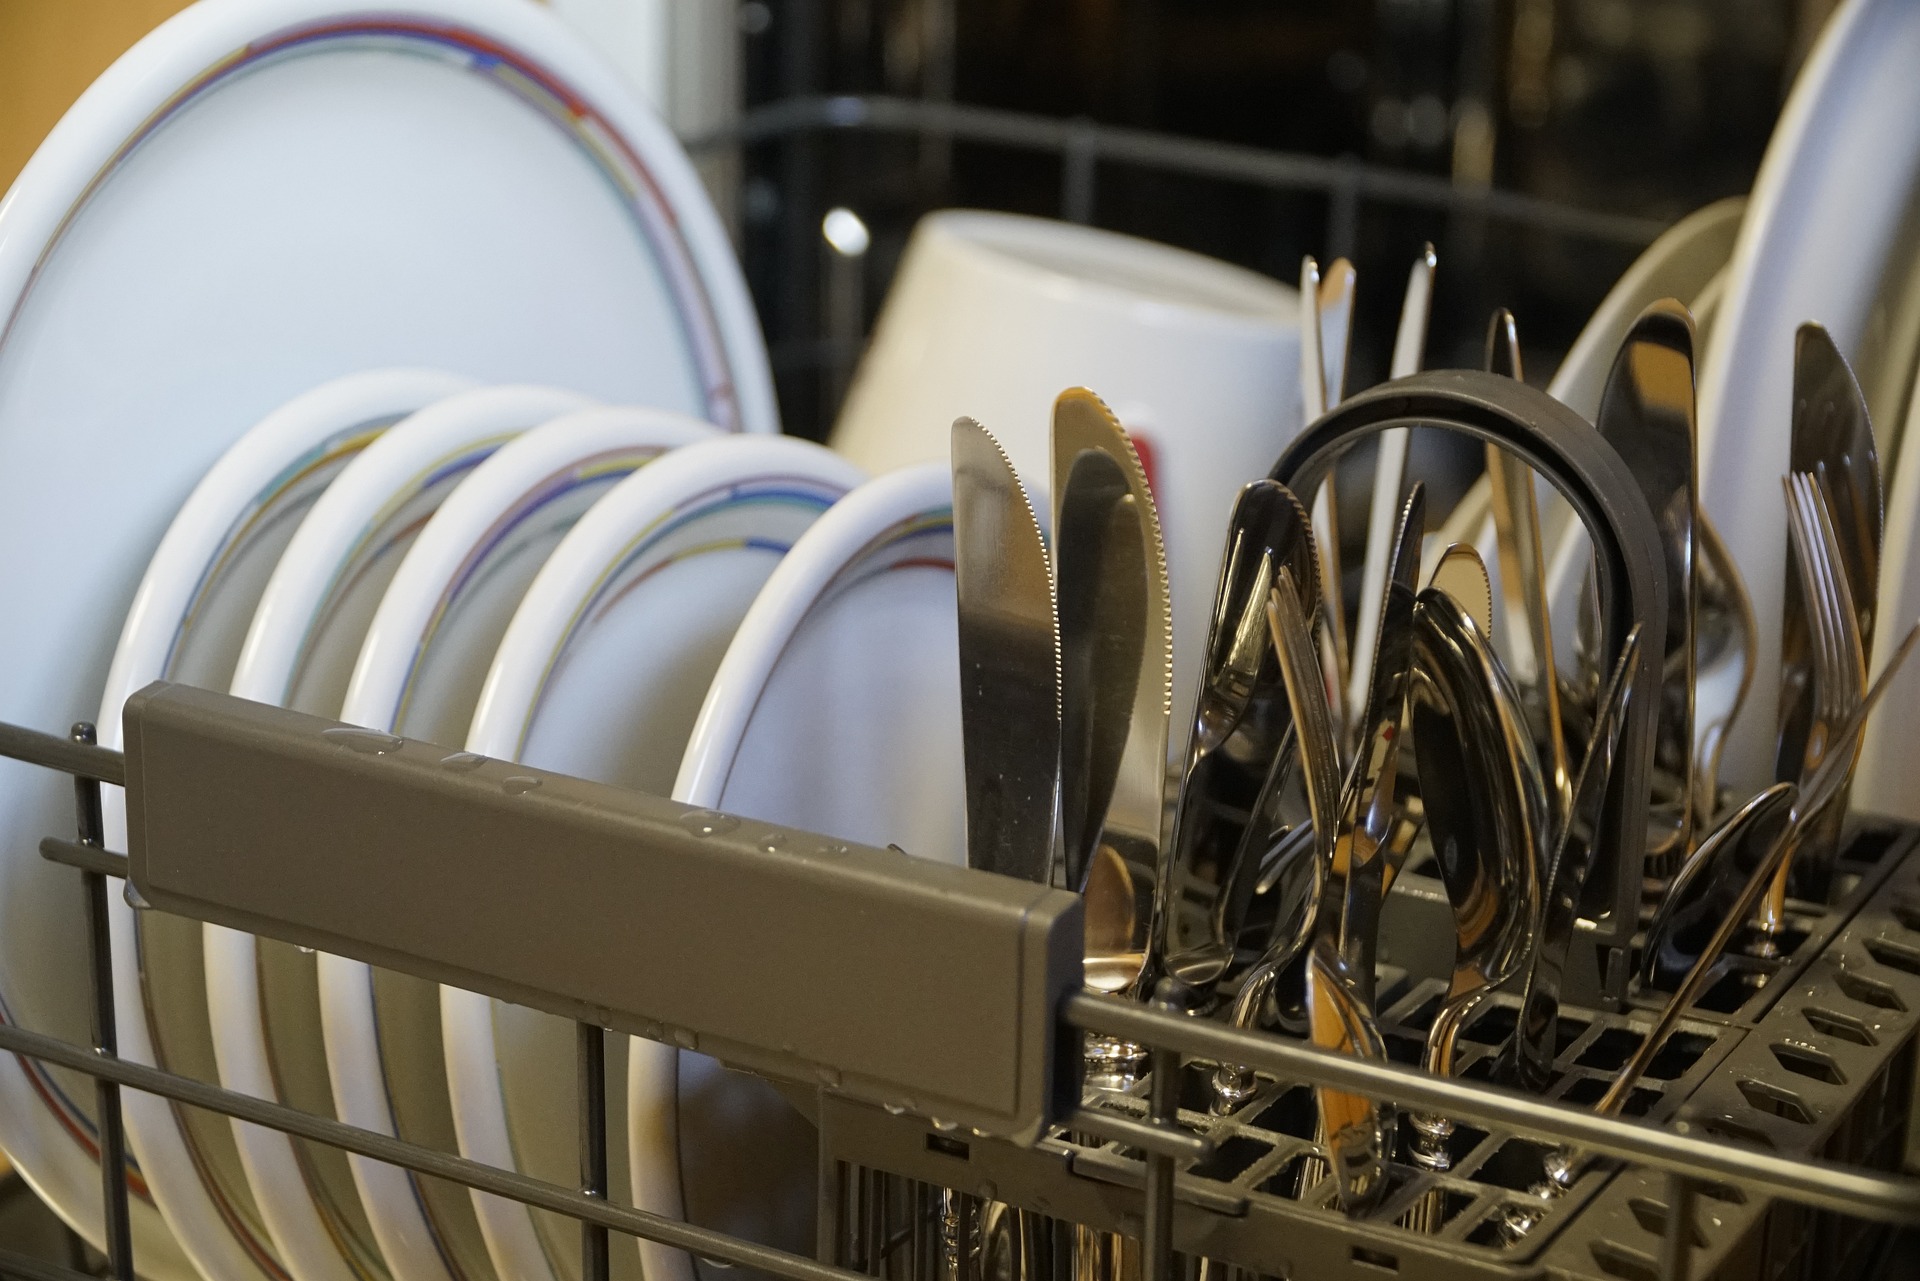 8 Reasons Your Dishwasher is Leaking